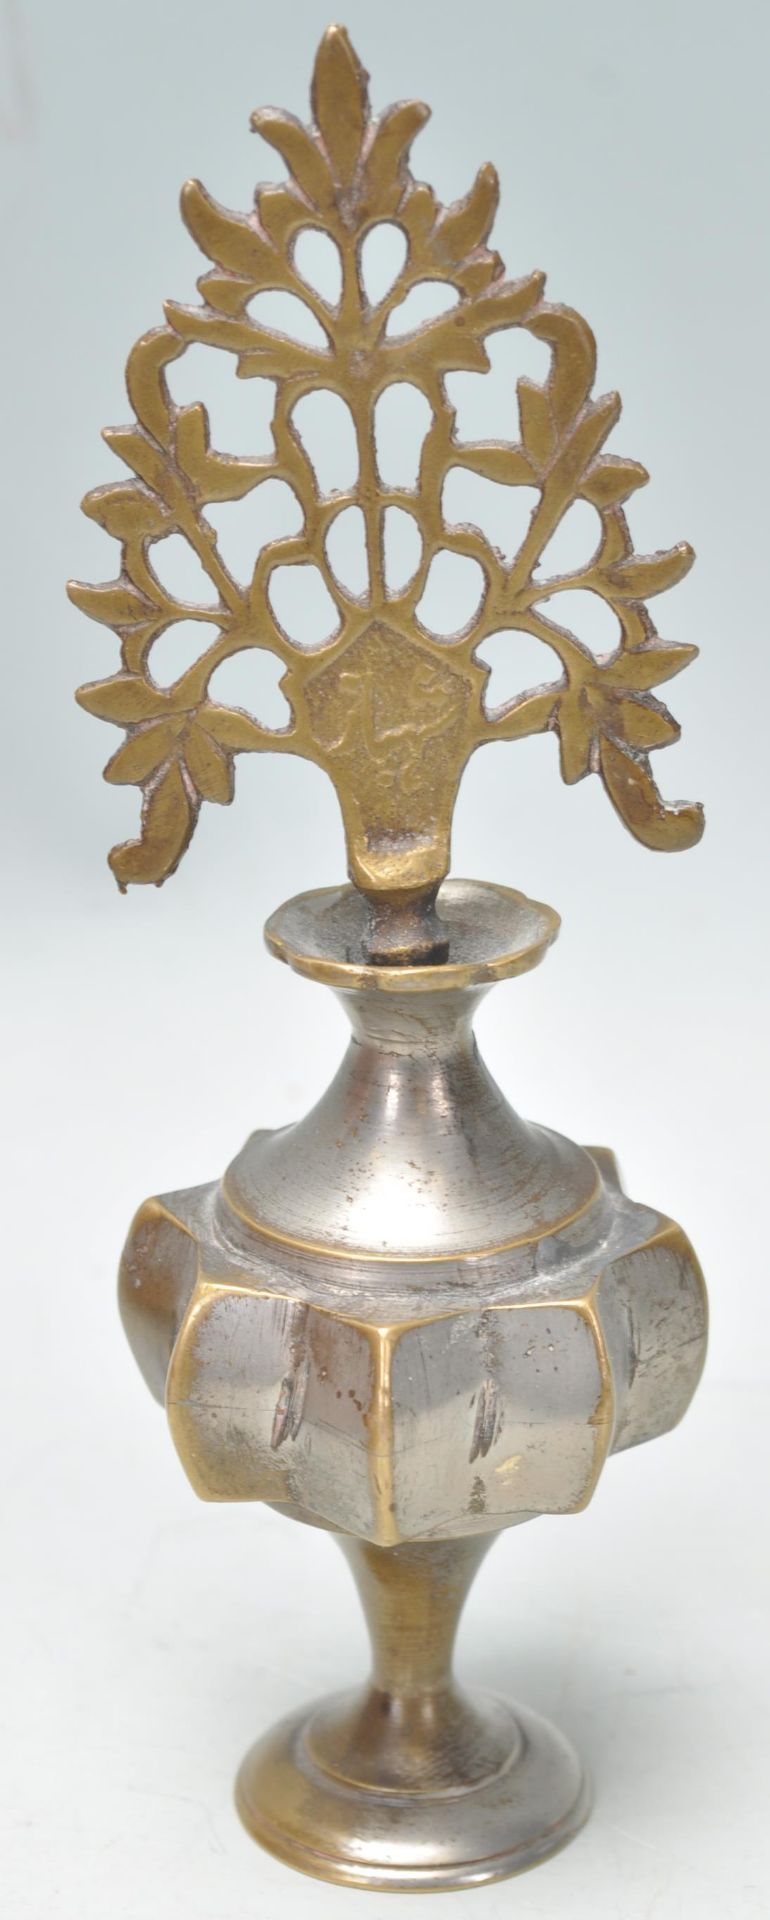 An early 20th Century Chinese brass scent bottle having a fret priced stopper and angular star body.